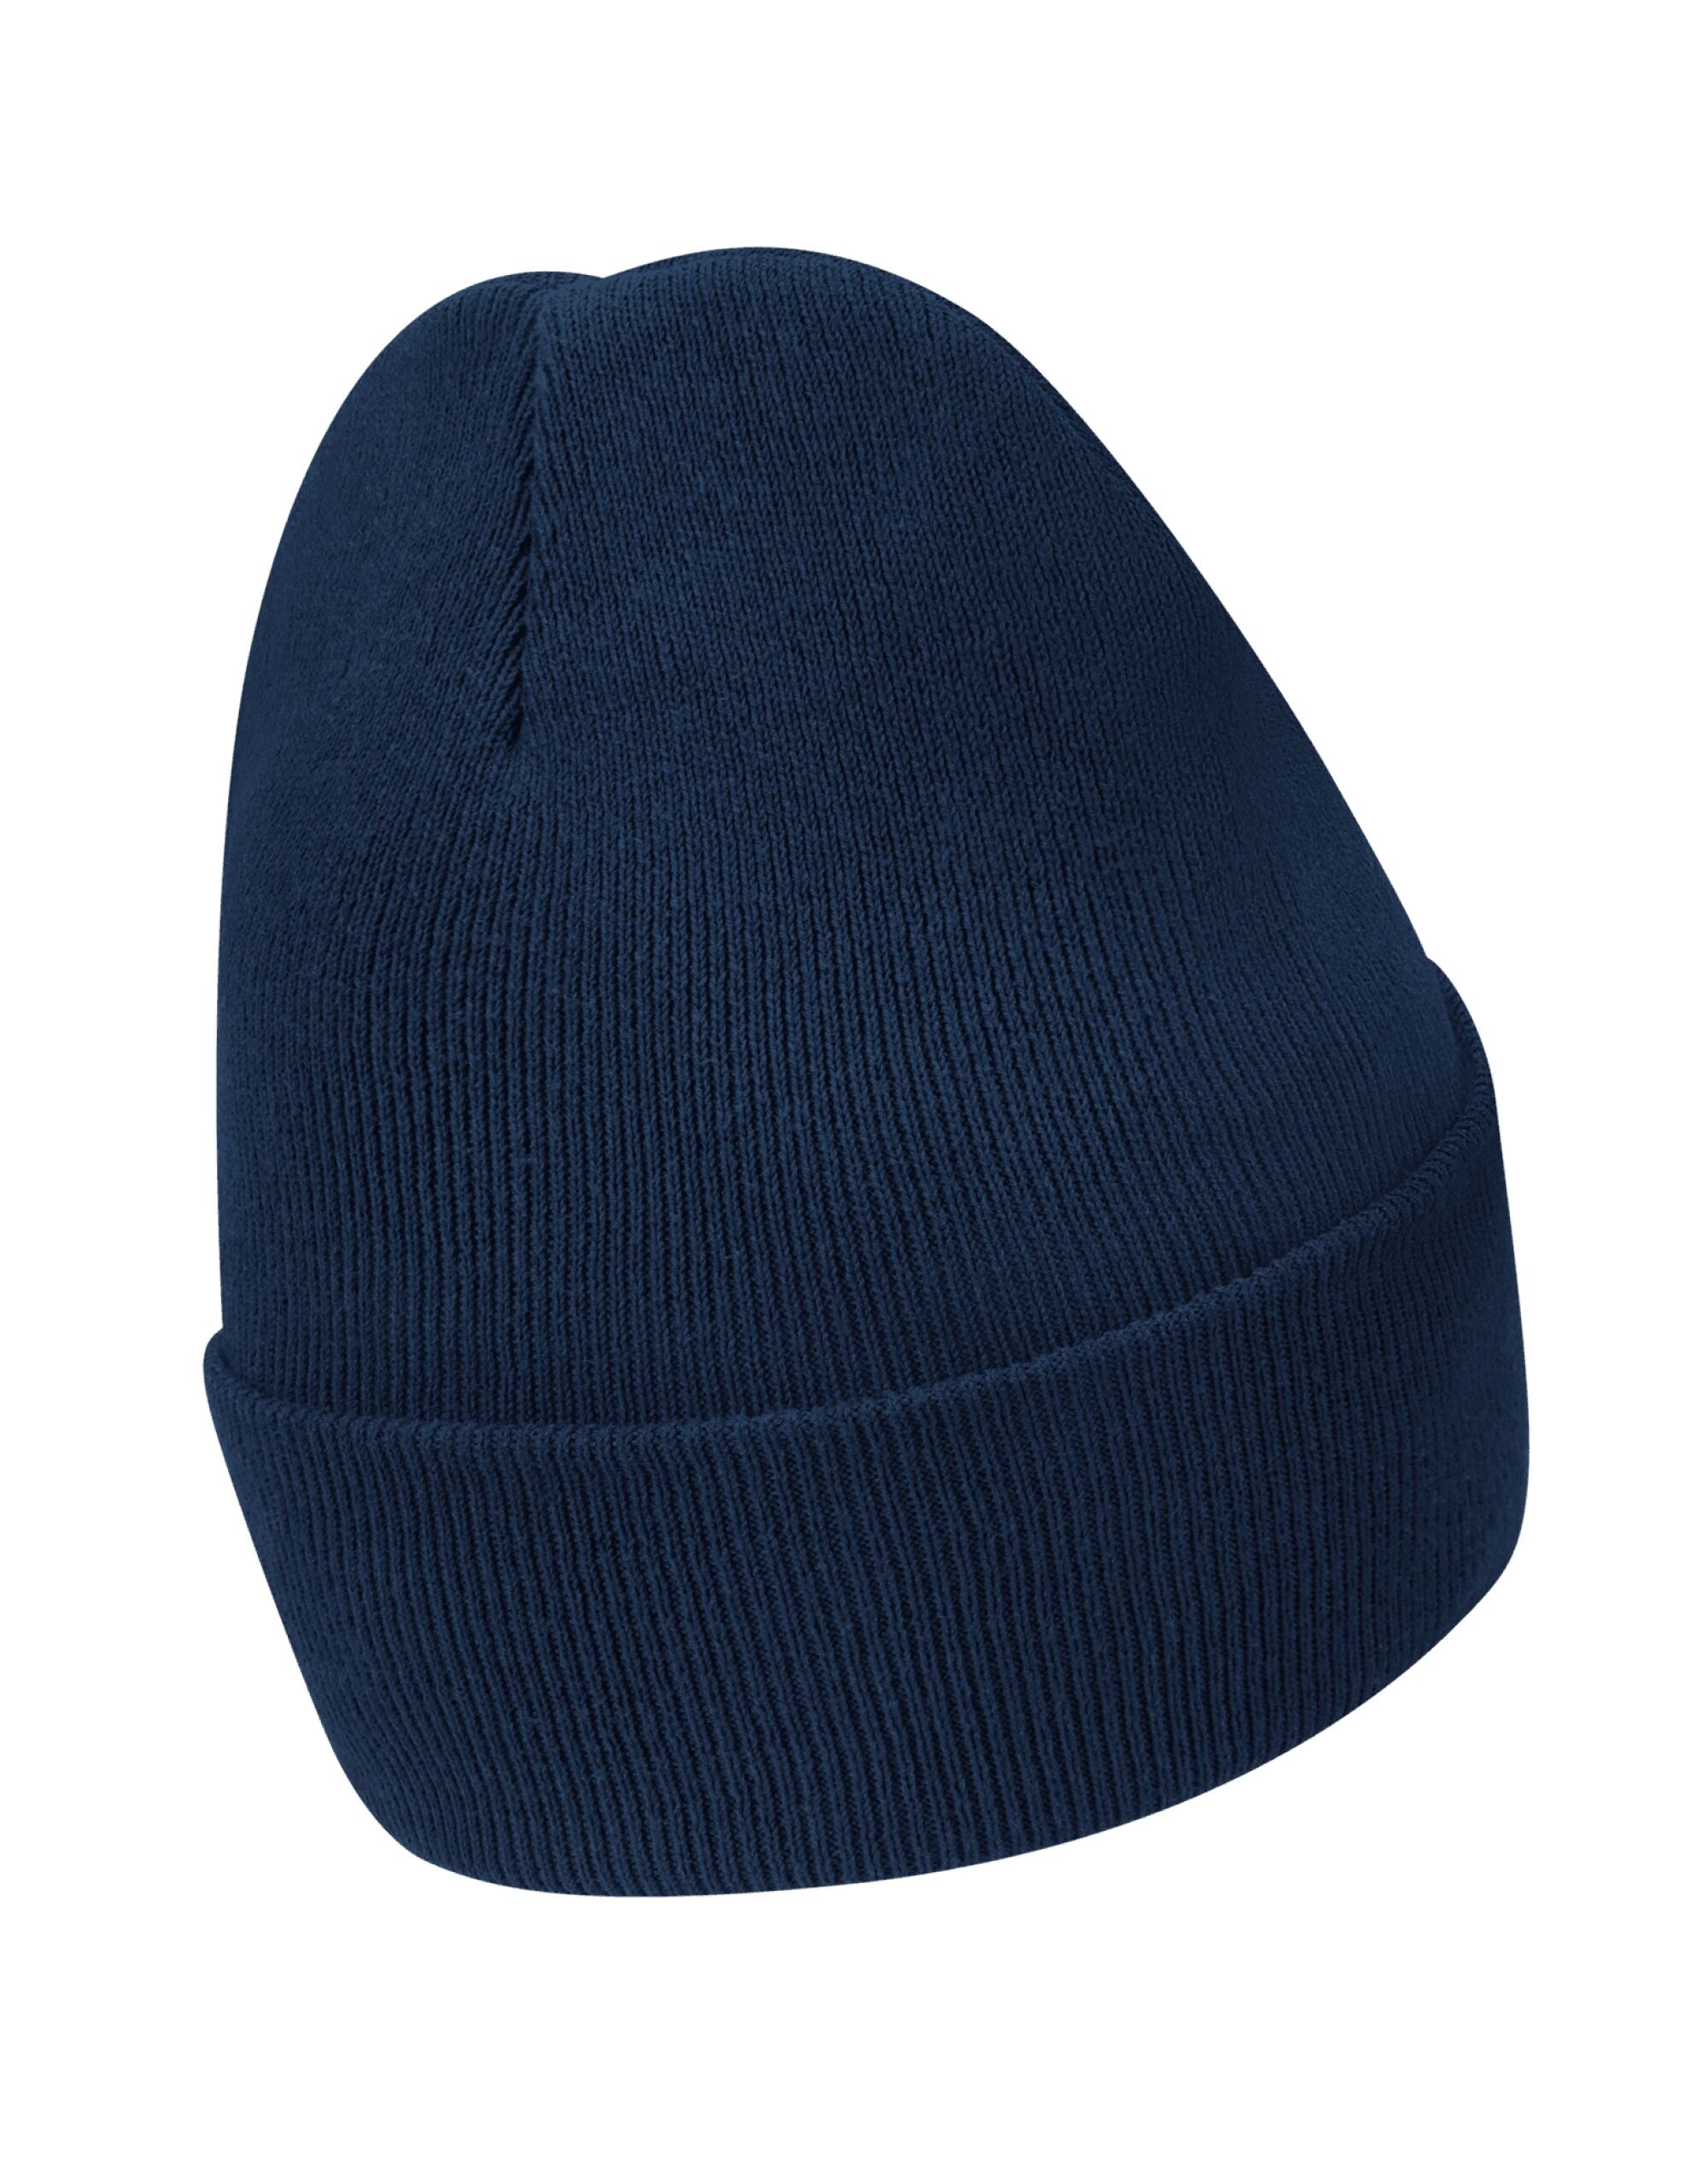 Nike Golf Utility Beanie  This product is made with at least 75&#37; recycled polyester and cotton fibres (DJ6224)